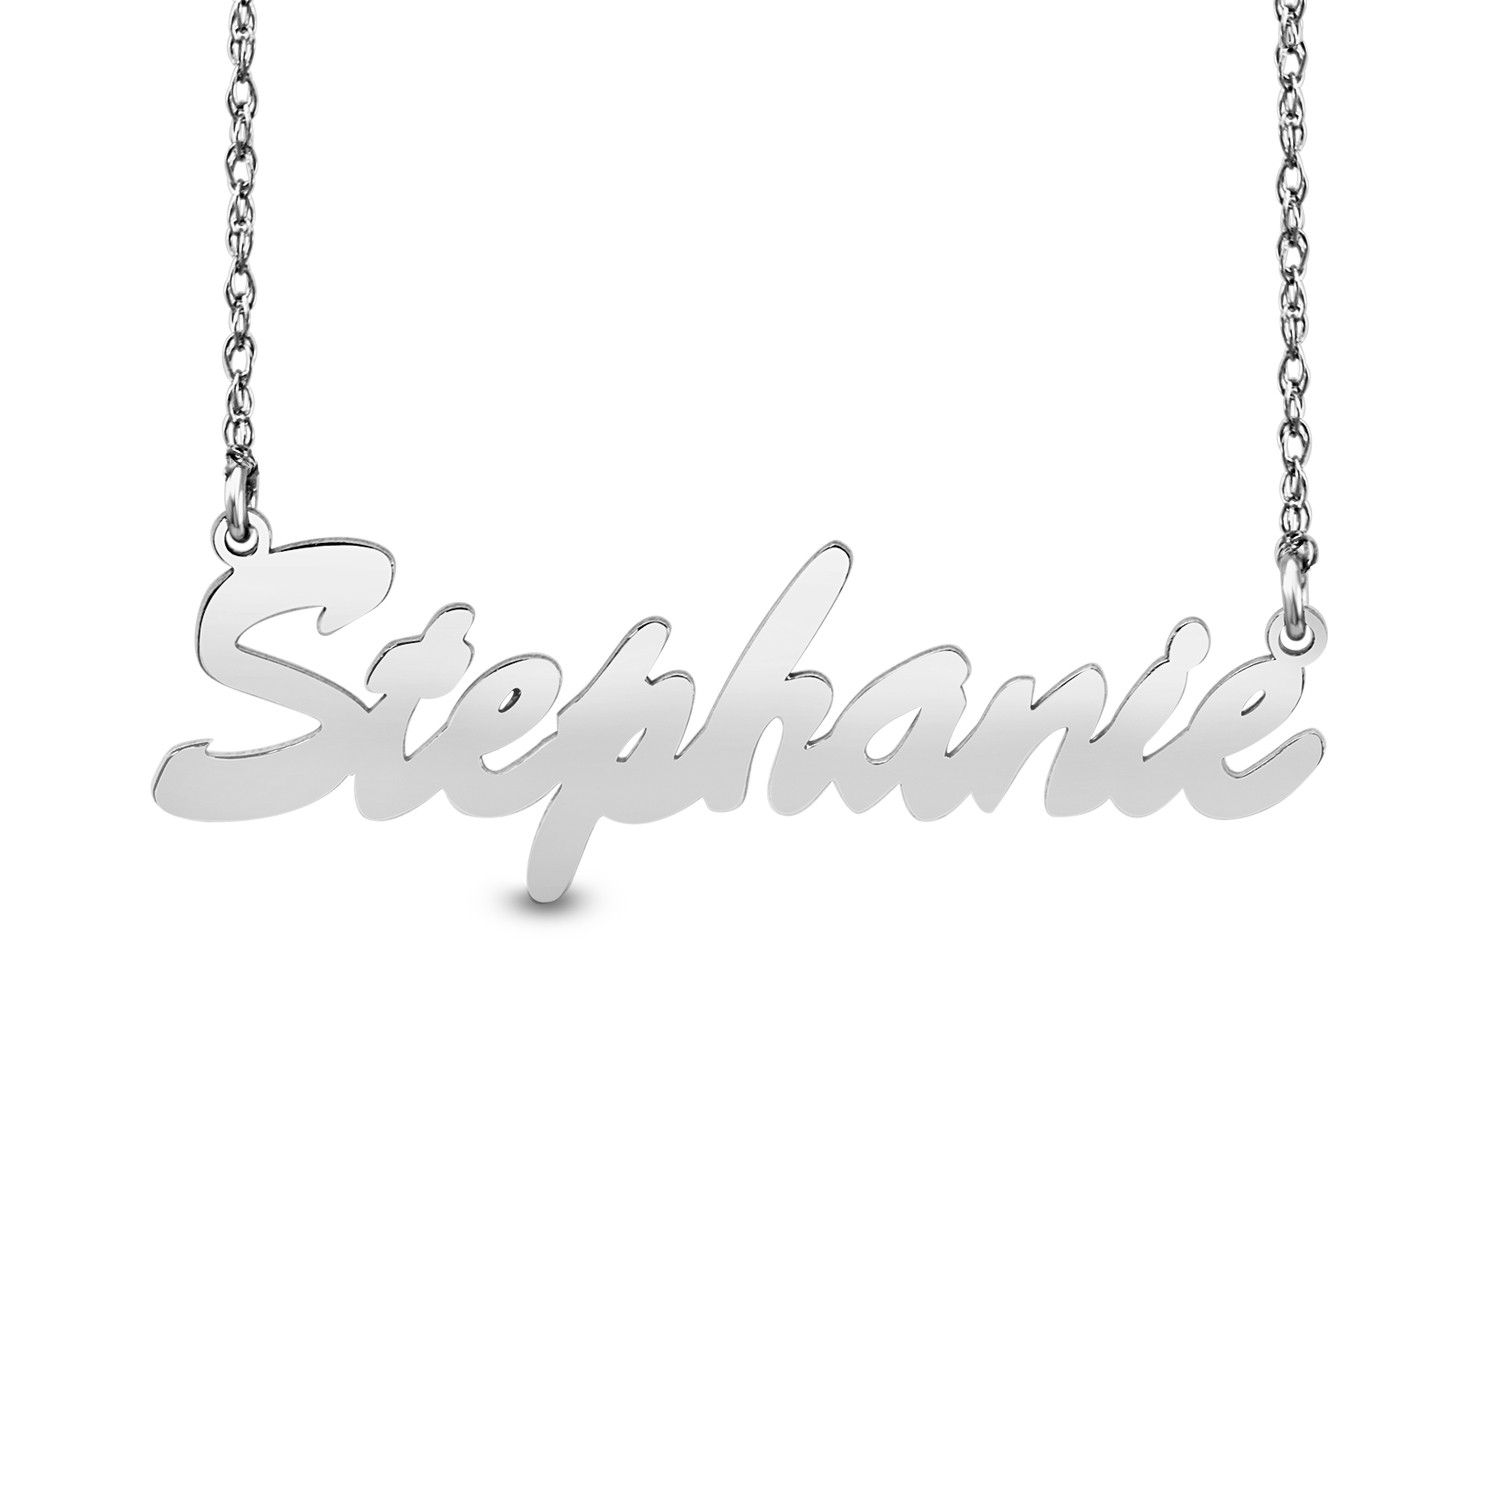 HI Polish Name Pers Necklace - 9 letter max 1 Uppercase letter (Example: Stephanie S =8.80mm x 1.40" e=5.06mm)